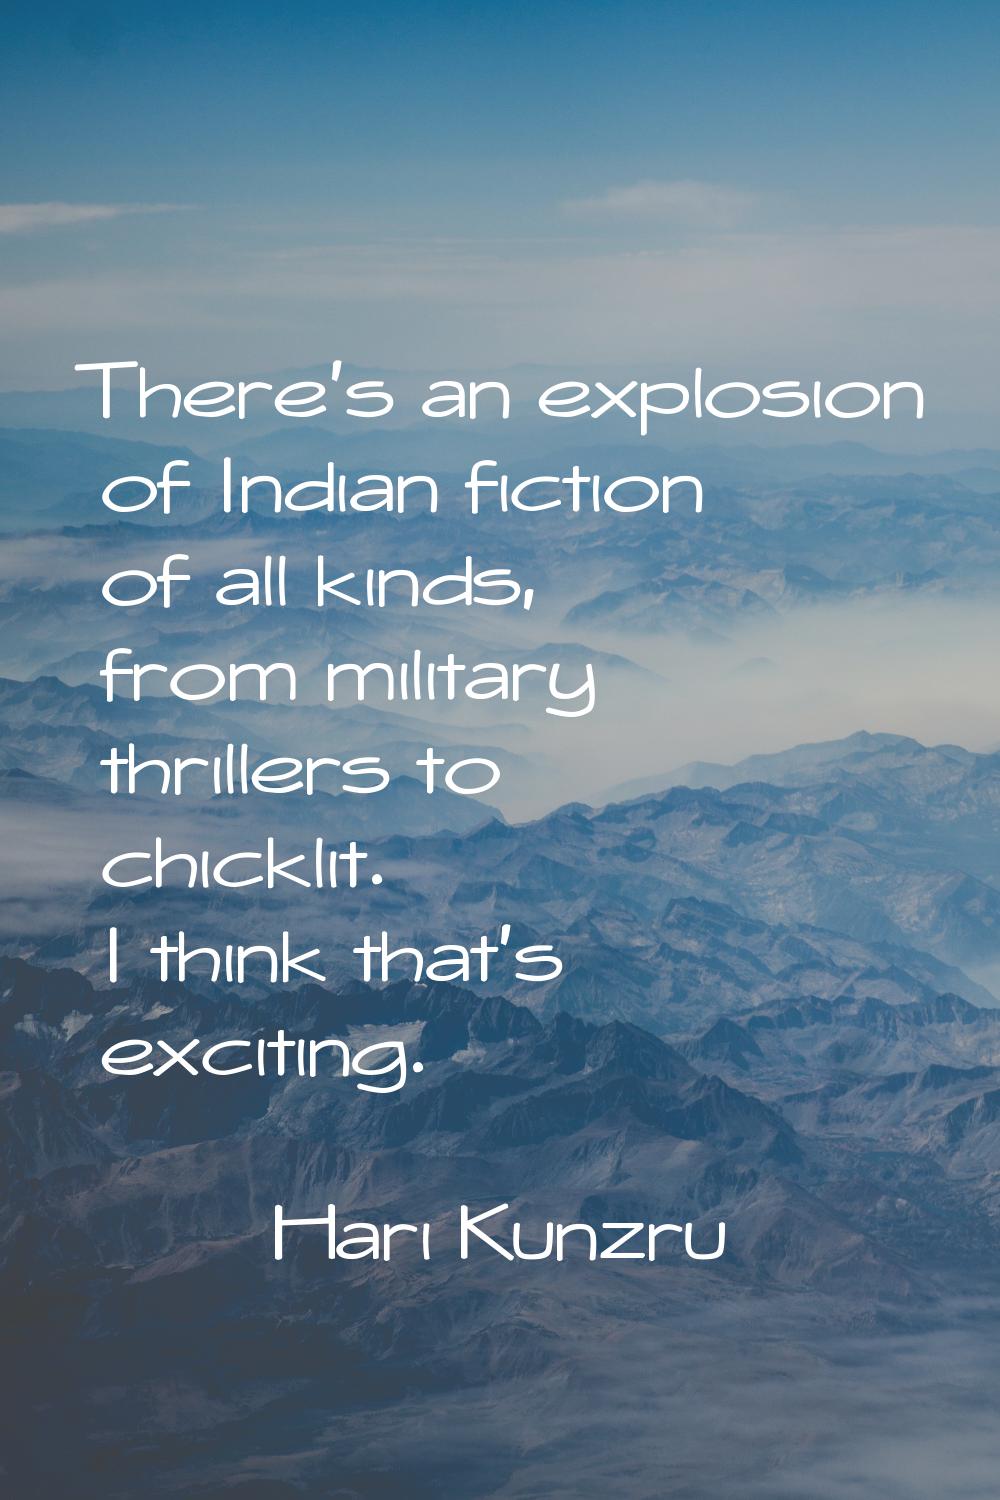 There's an explosion of Indian fiction of all kinds, from military thrillers to chicklit. I think t